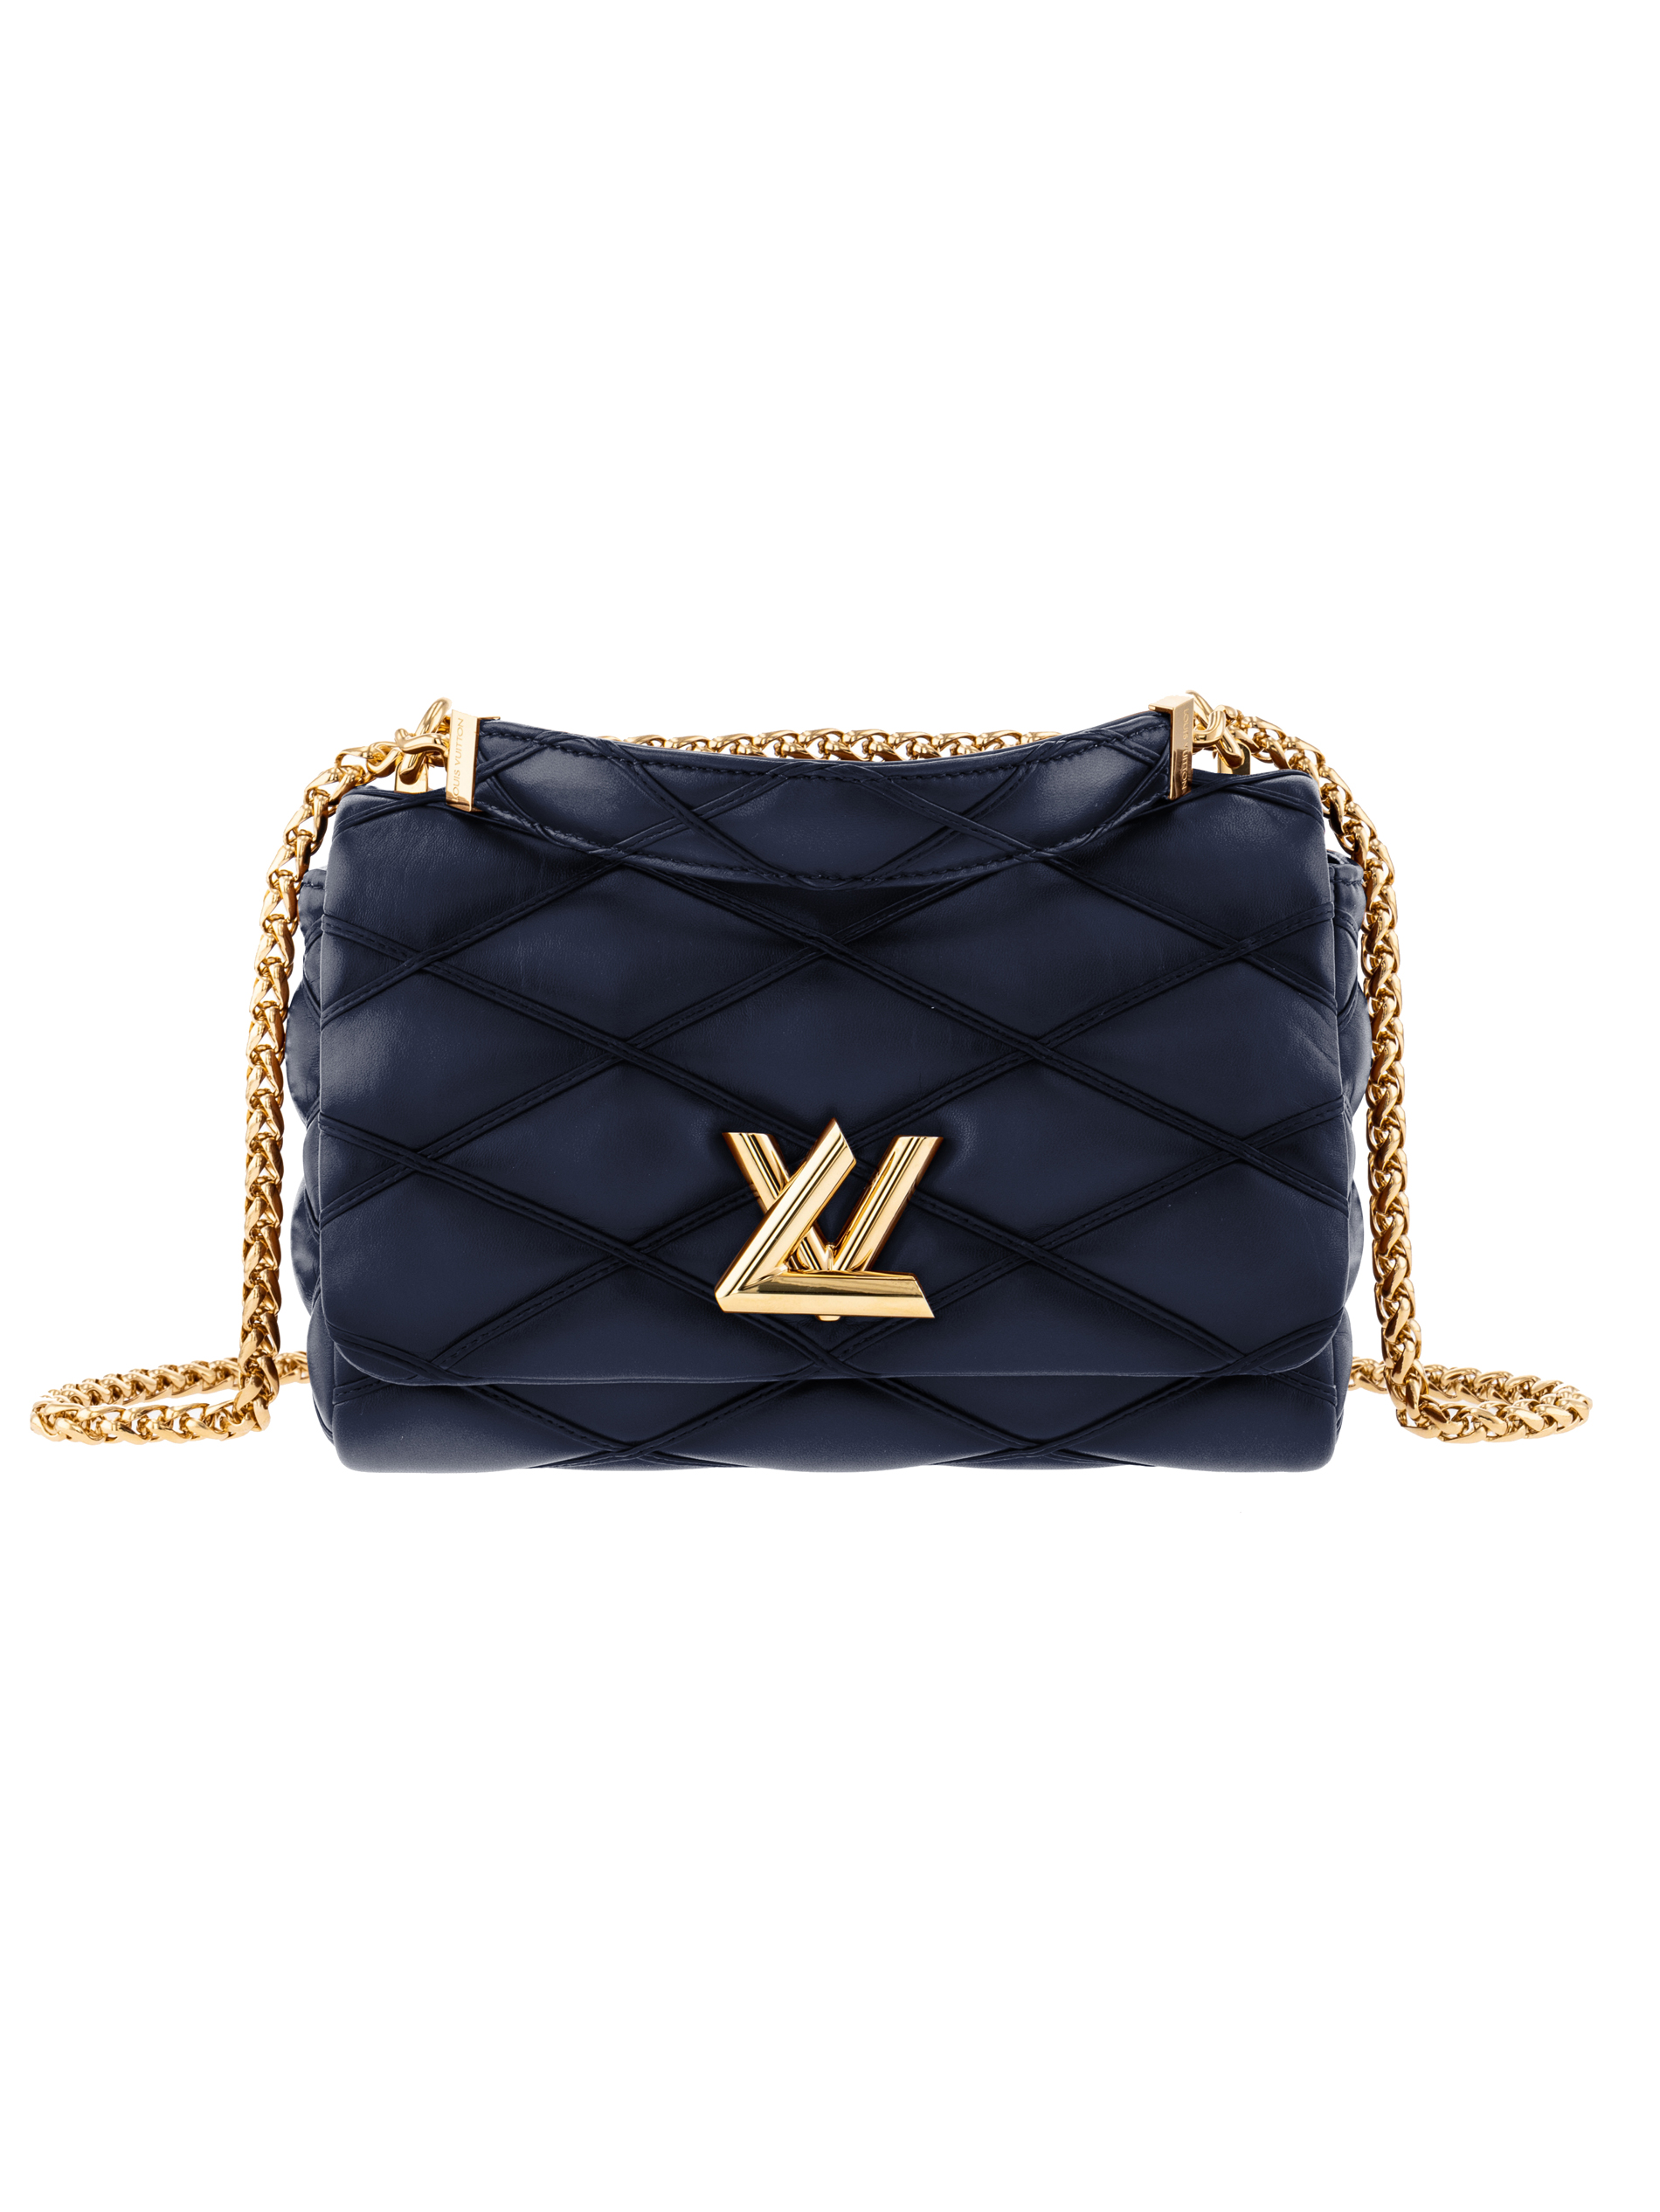 Be the First to View the New Louis Vuitton GO-14